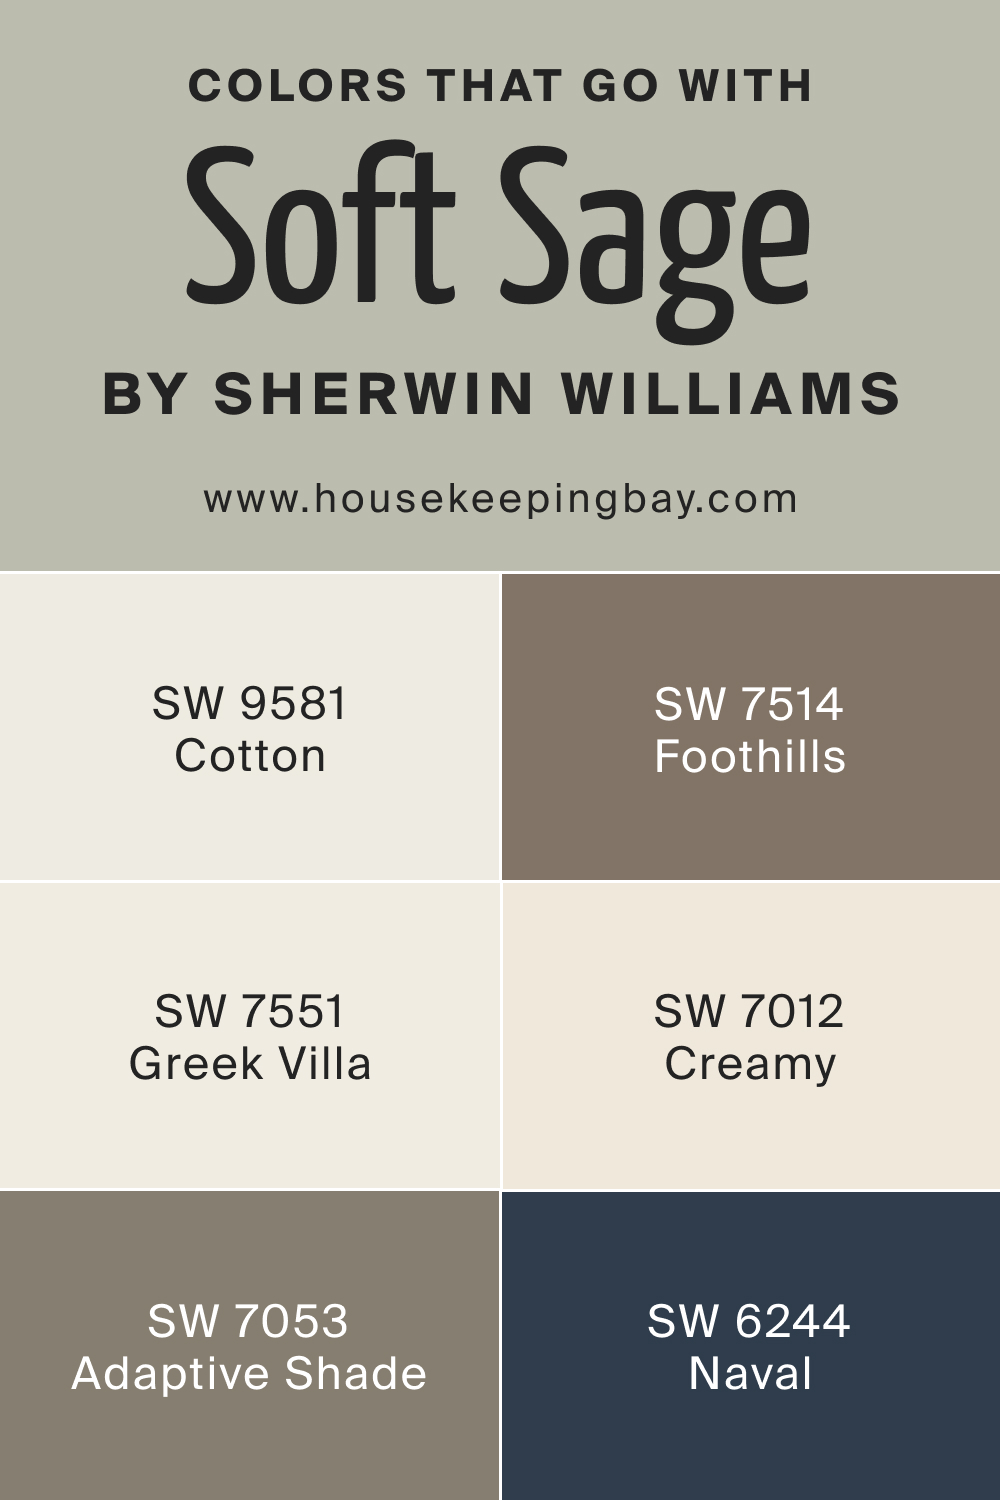 Colors that goes with SW 9647 Soft Sage by Sherwin Williams